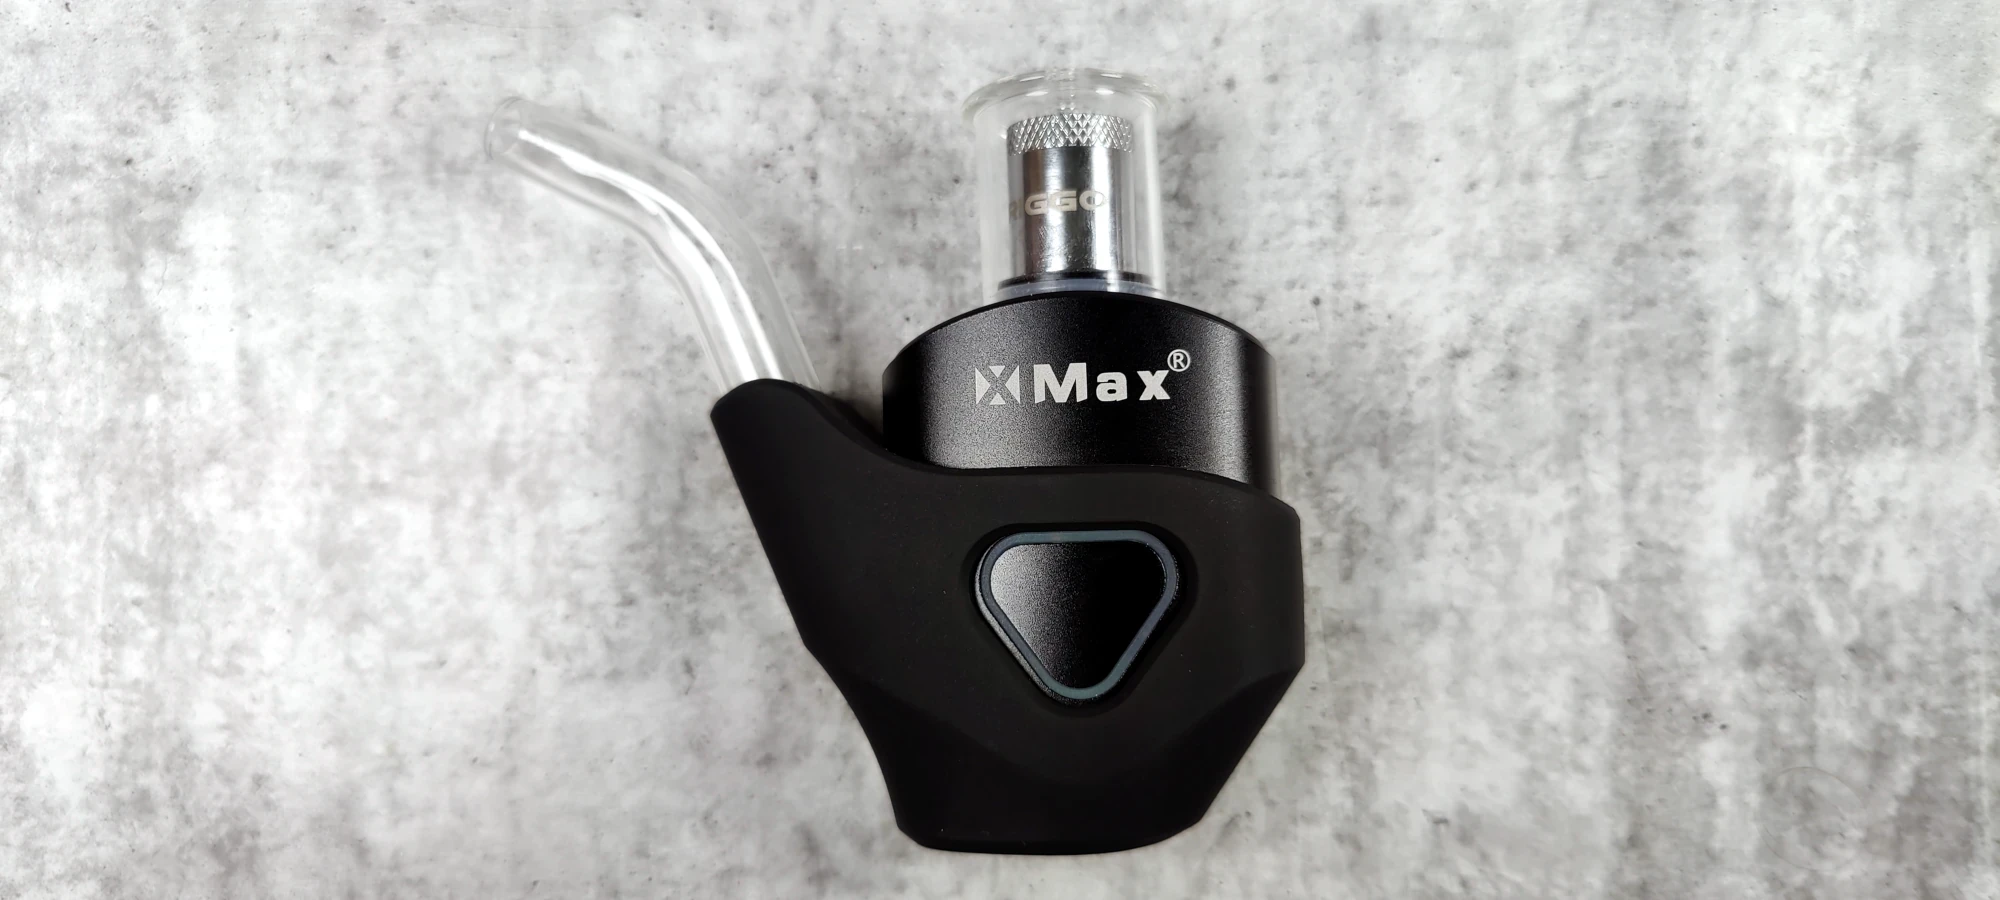 XMAX Riggo with pipe mouthpiece attached